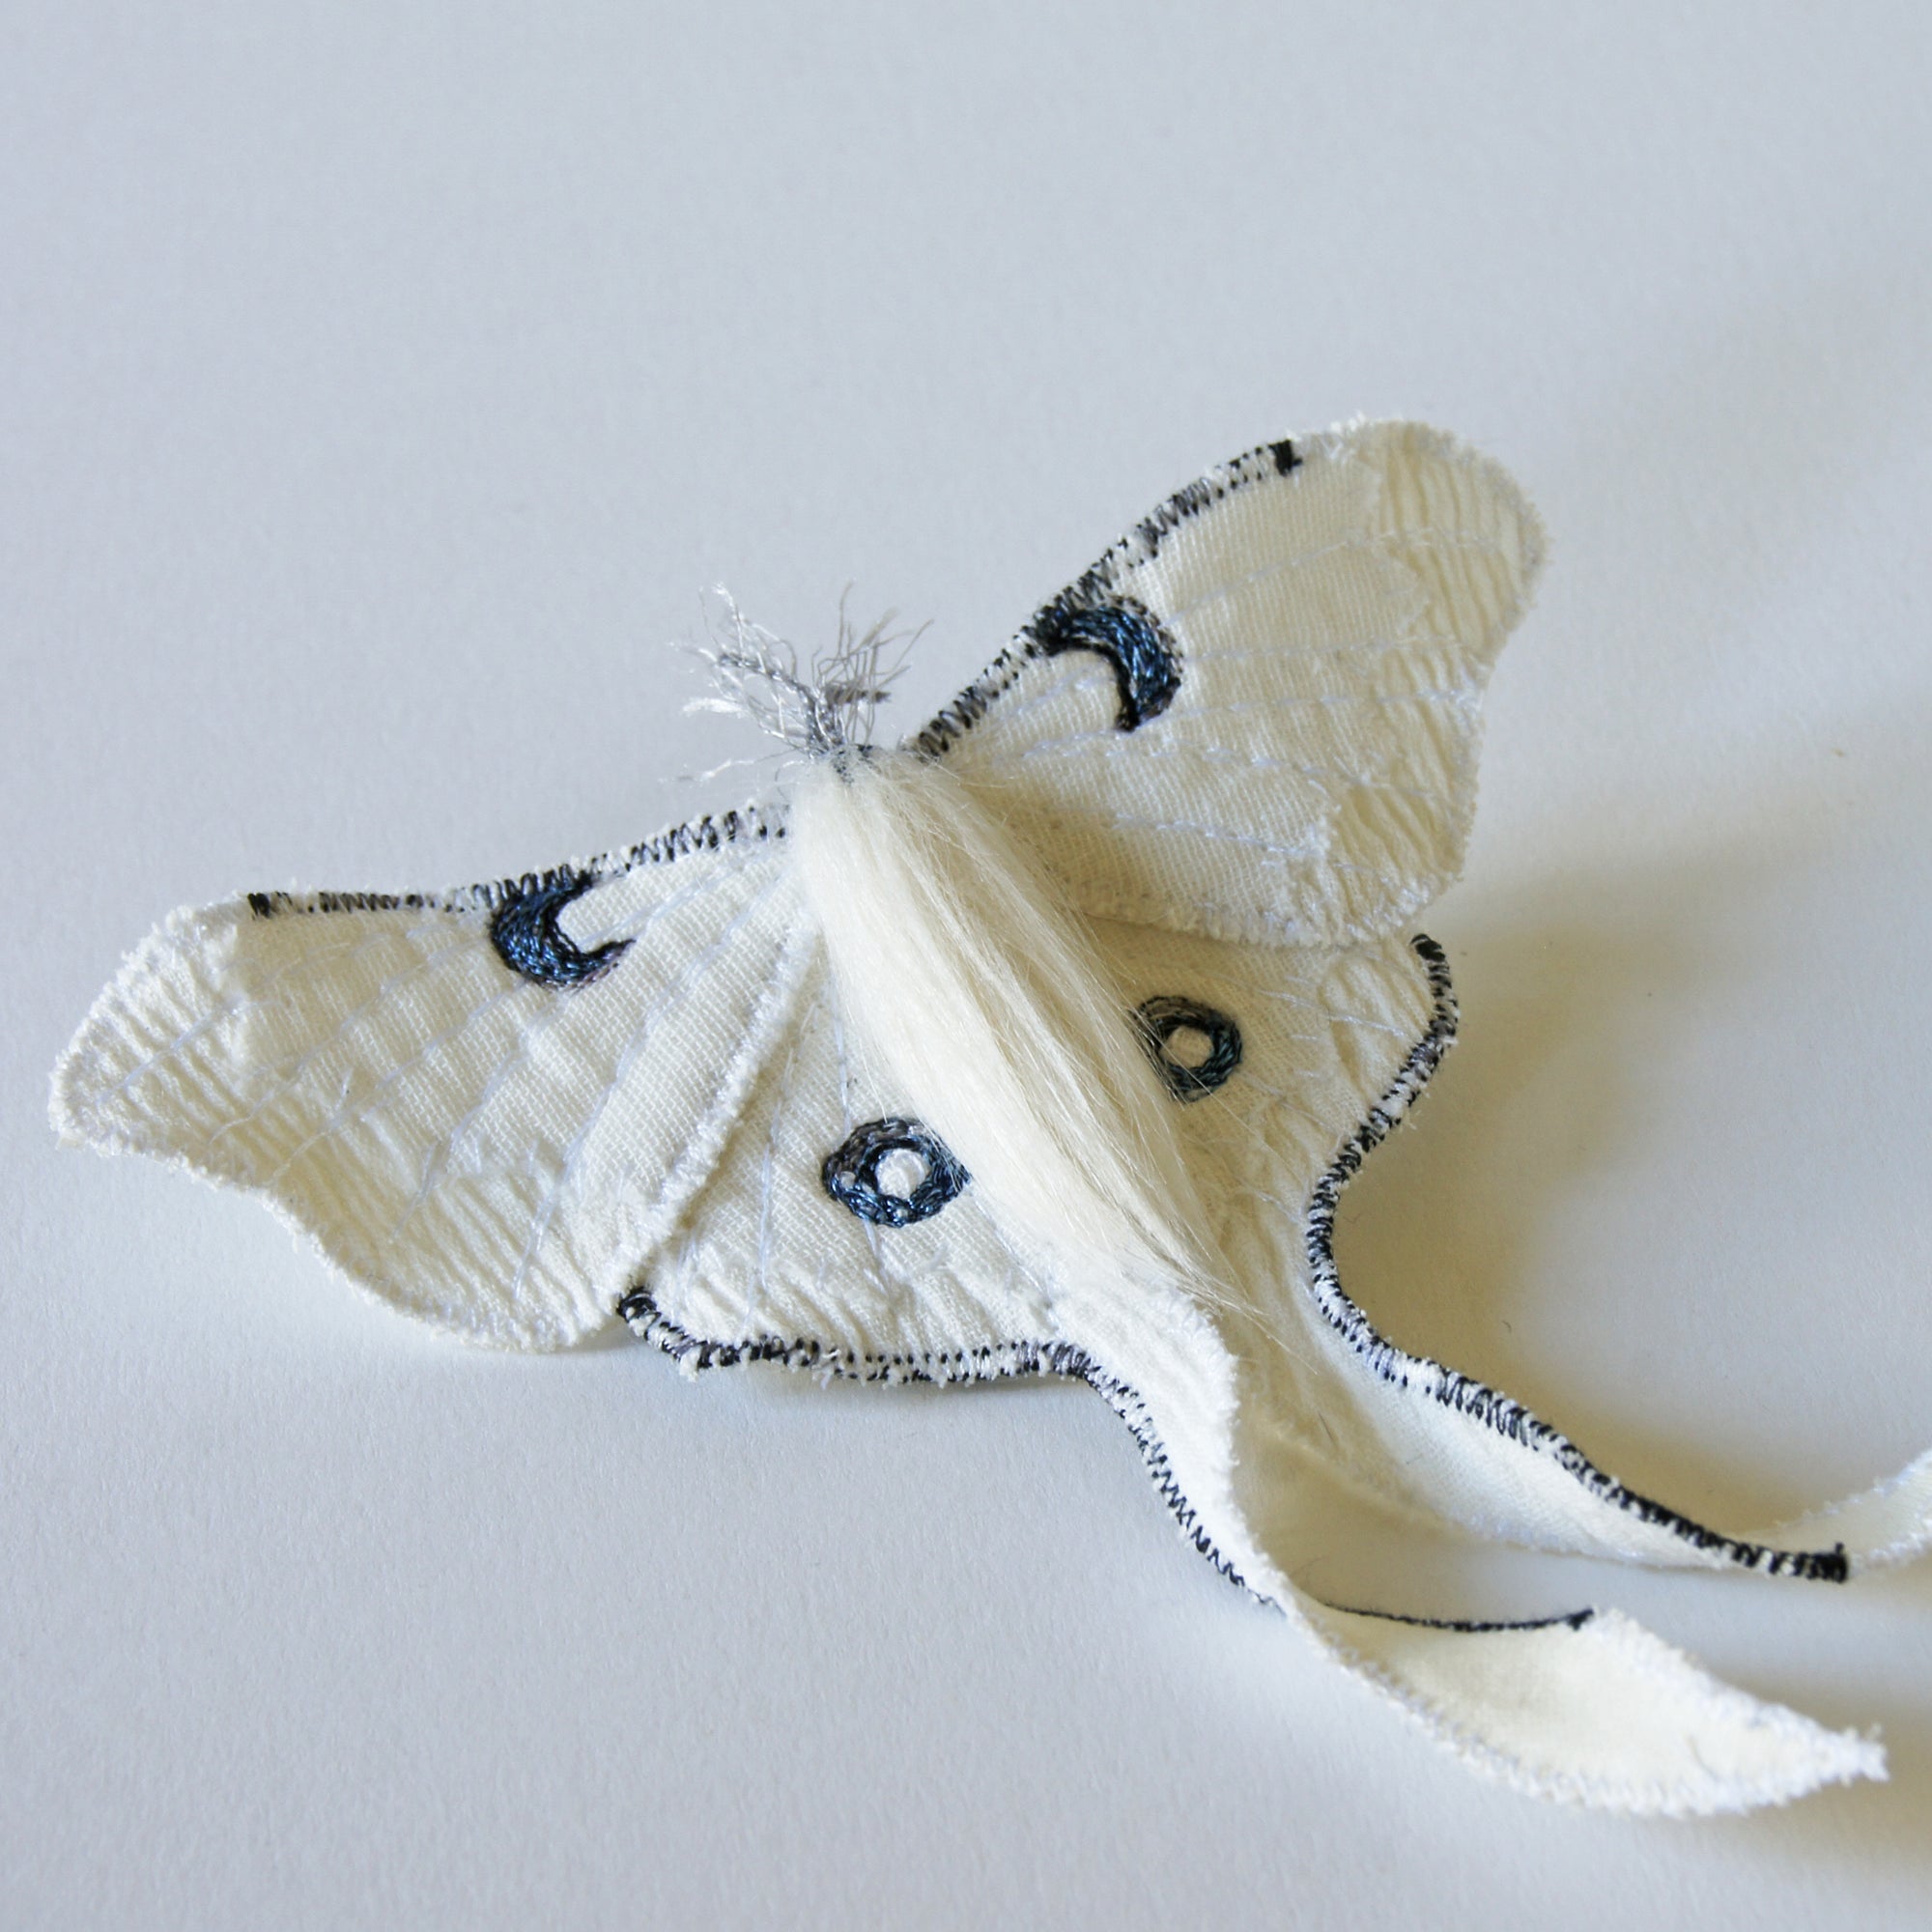 White Luna Moth Brooch Created in Collaboration with Nuit Clothing Atelier